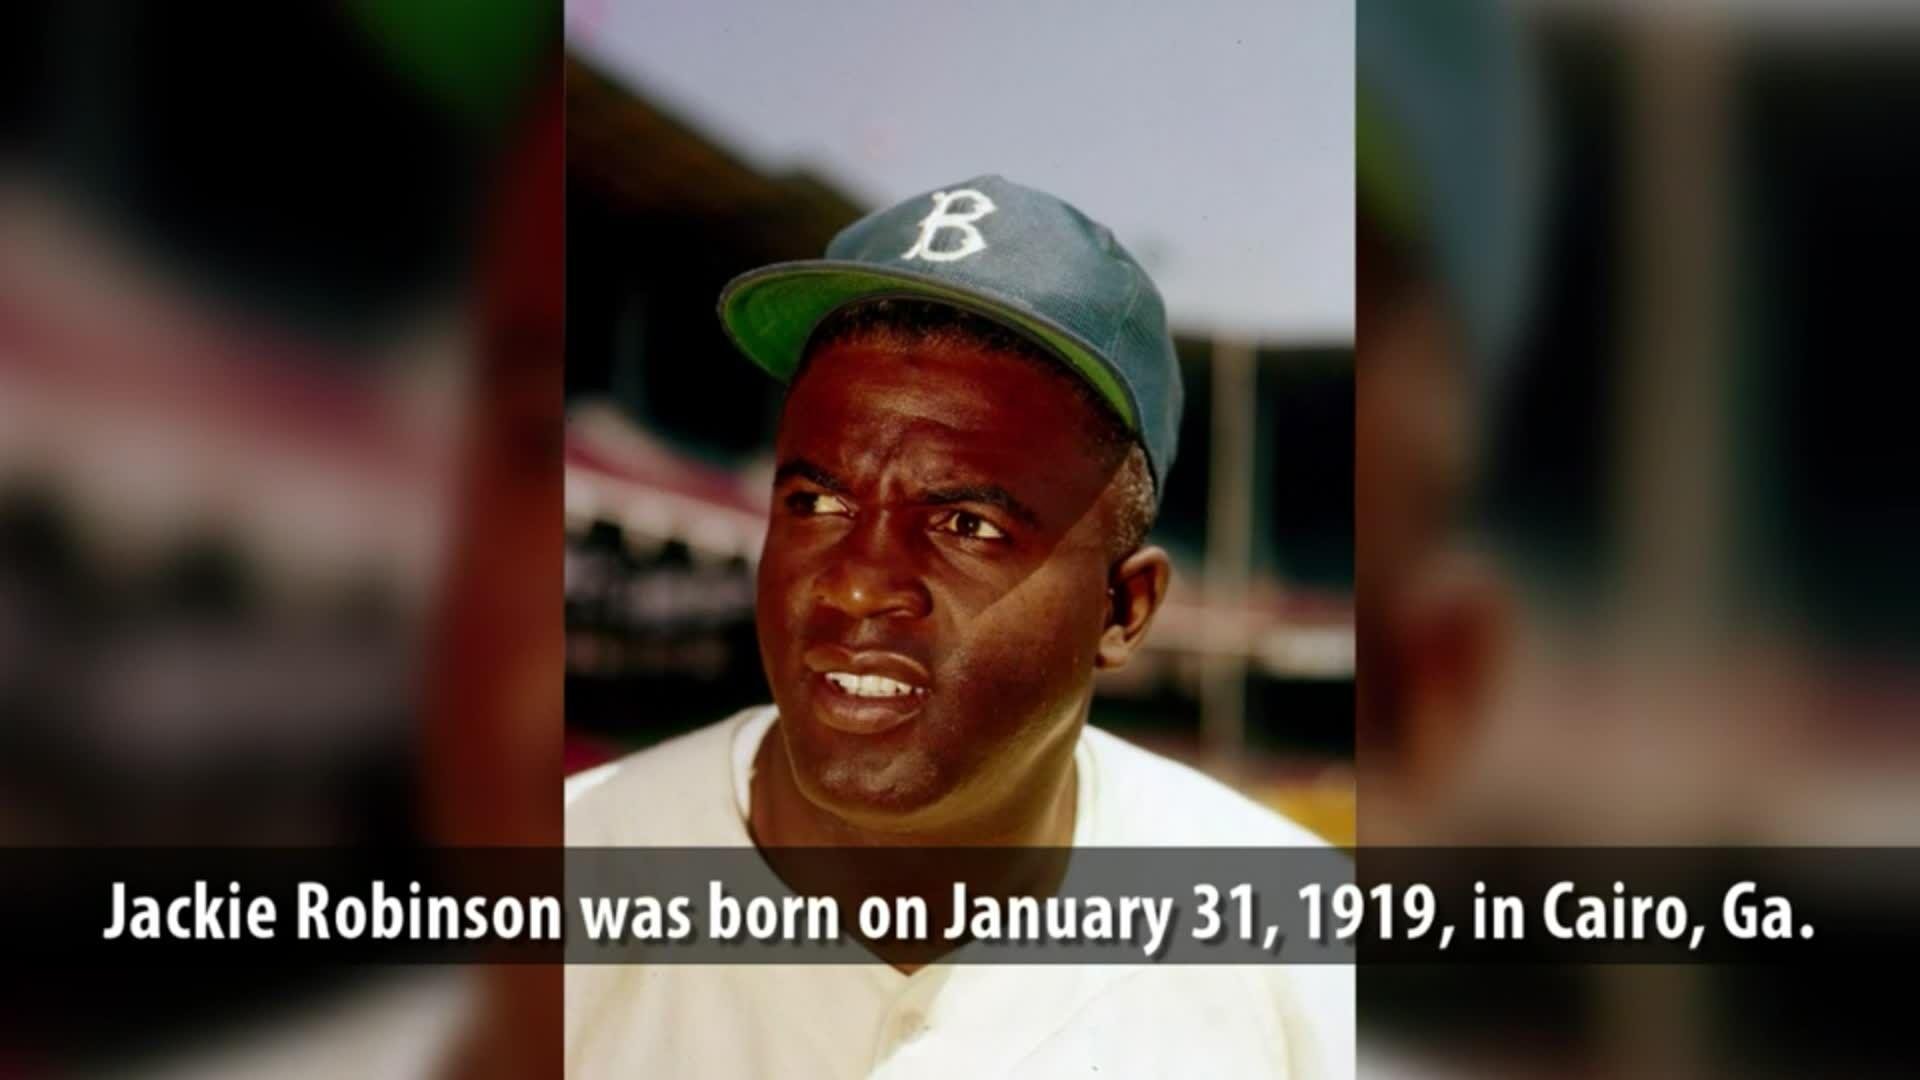 Jackie Robinson 75th anniversary hollow with MLB's lack of progress